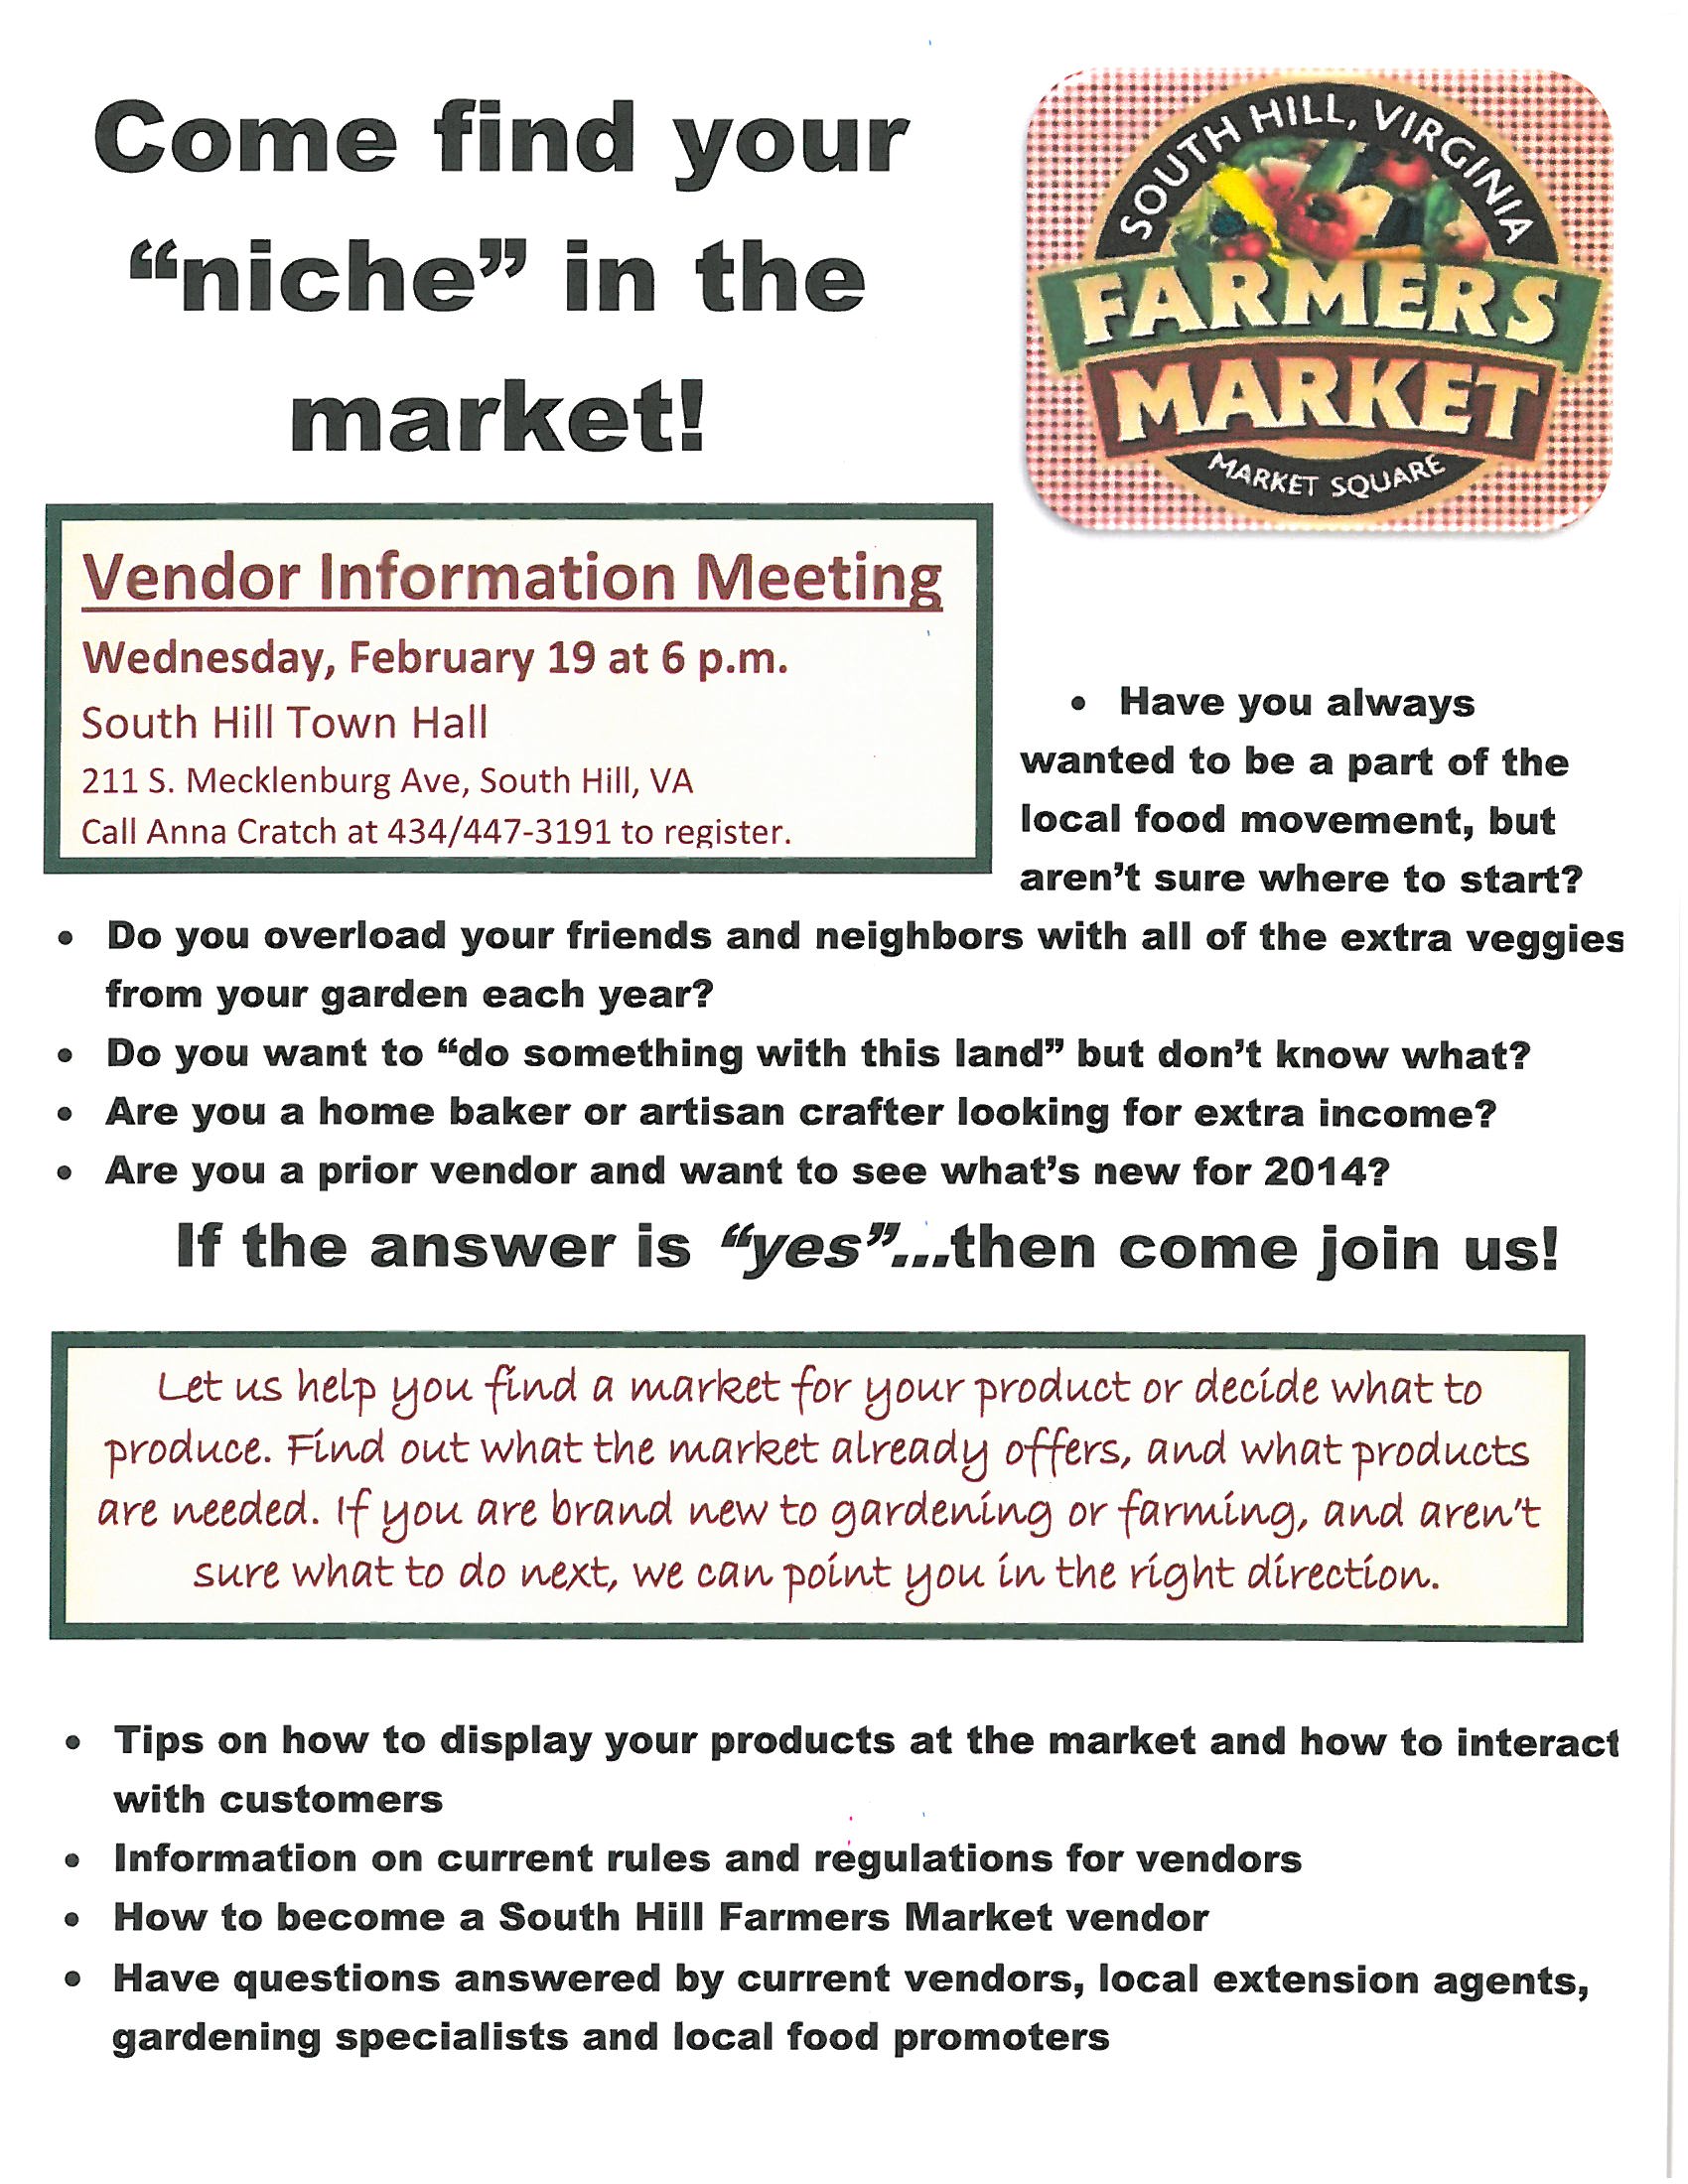 South Hill Farmers Market Meeting